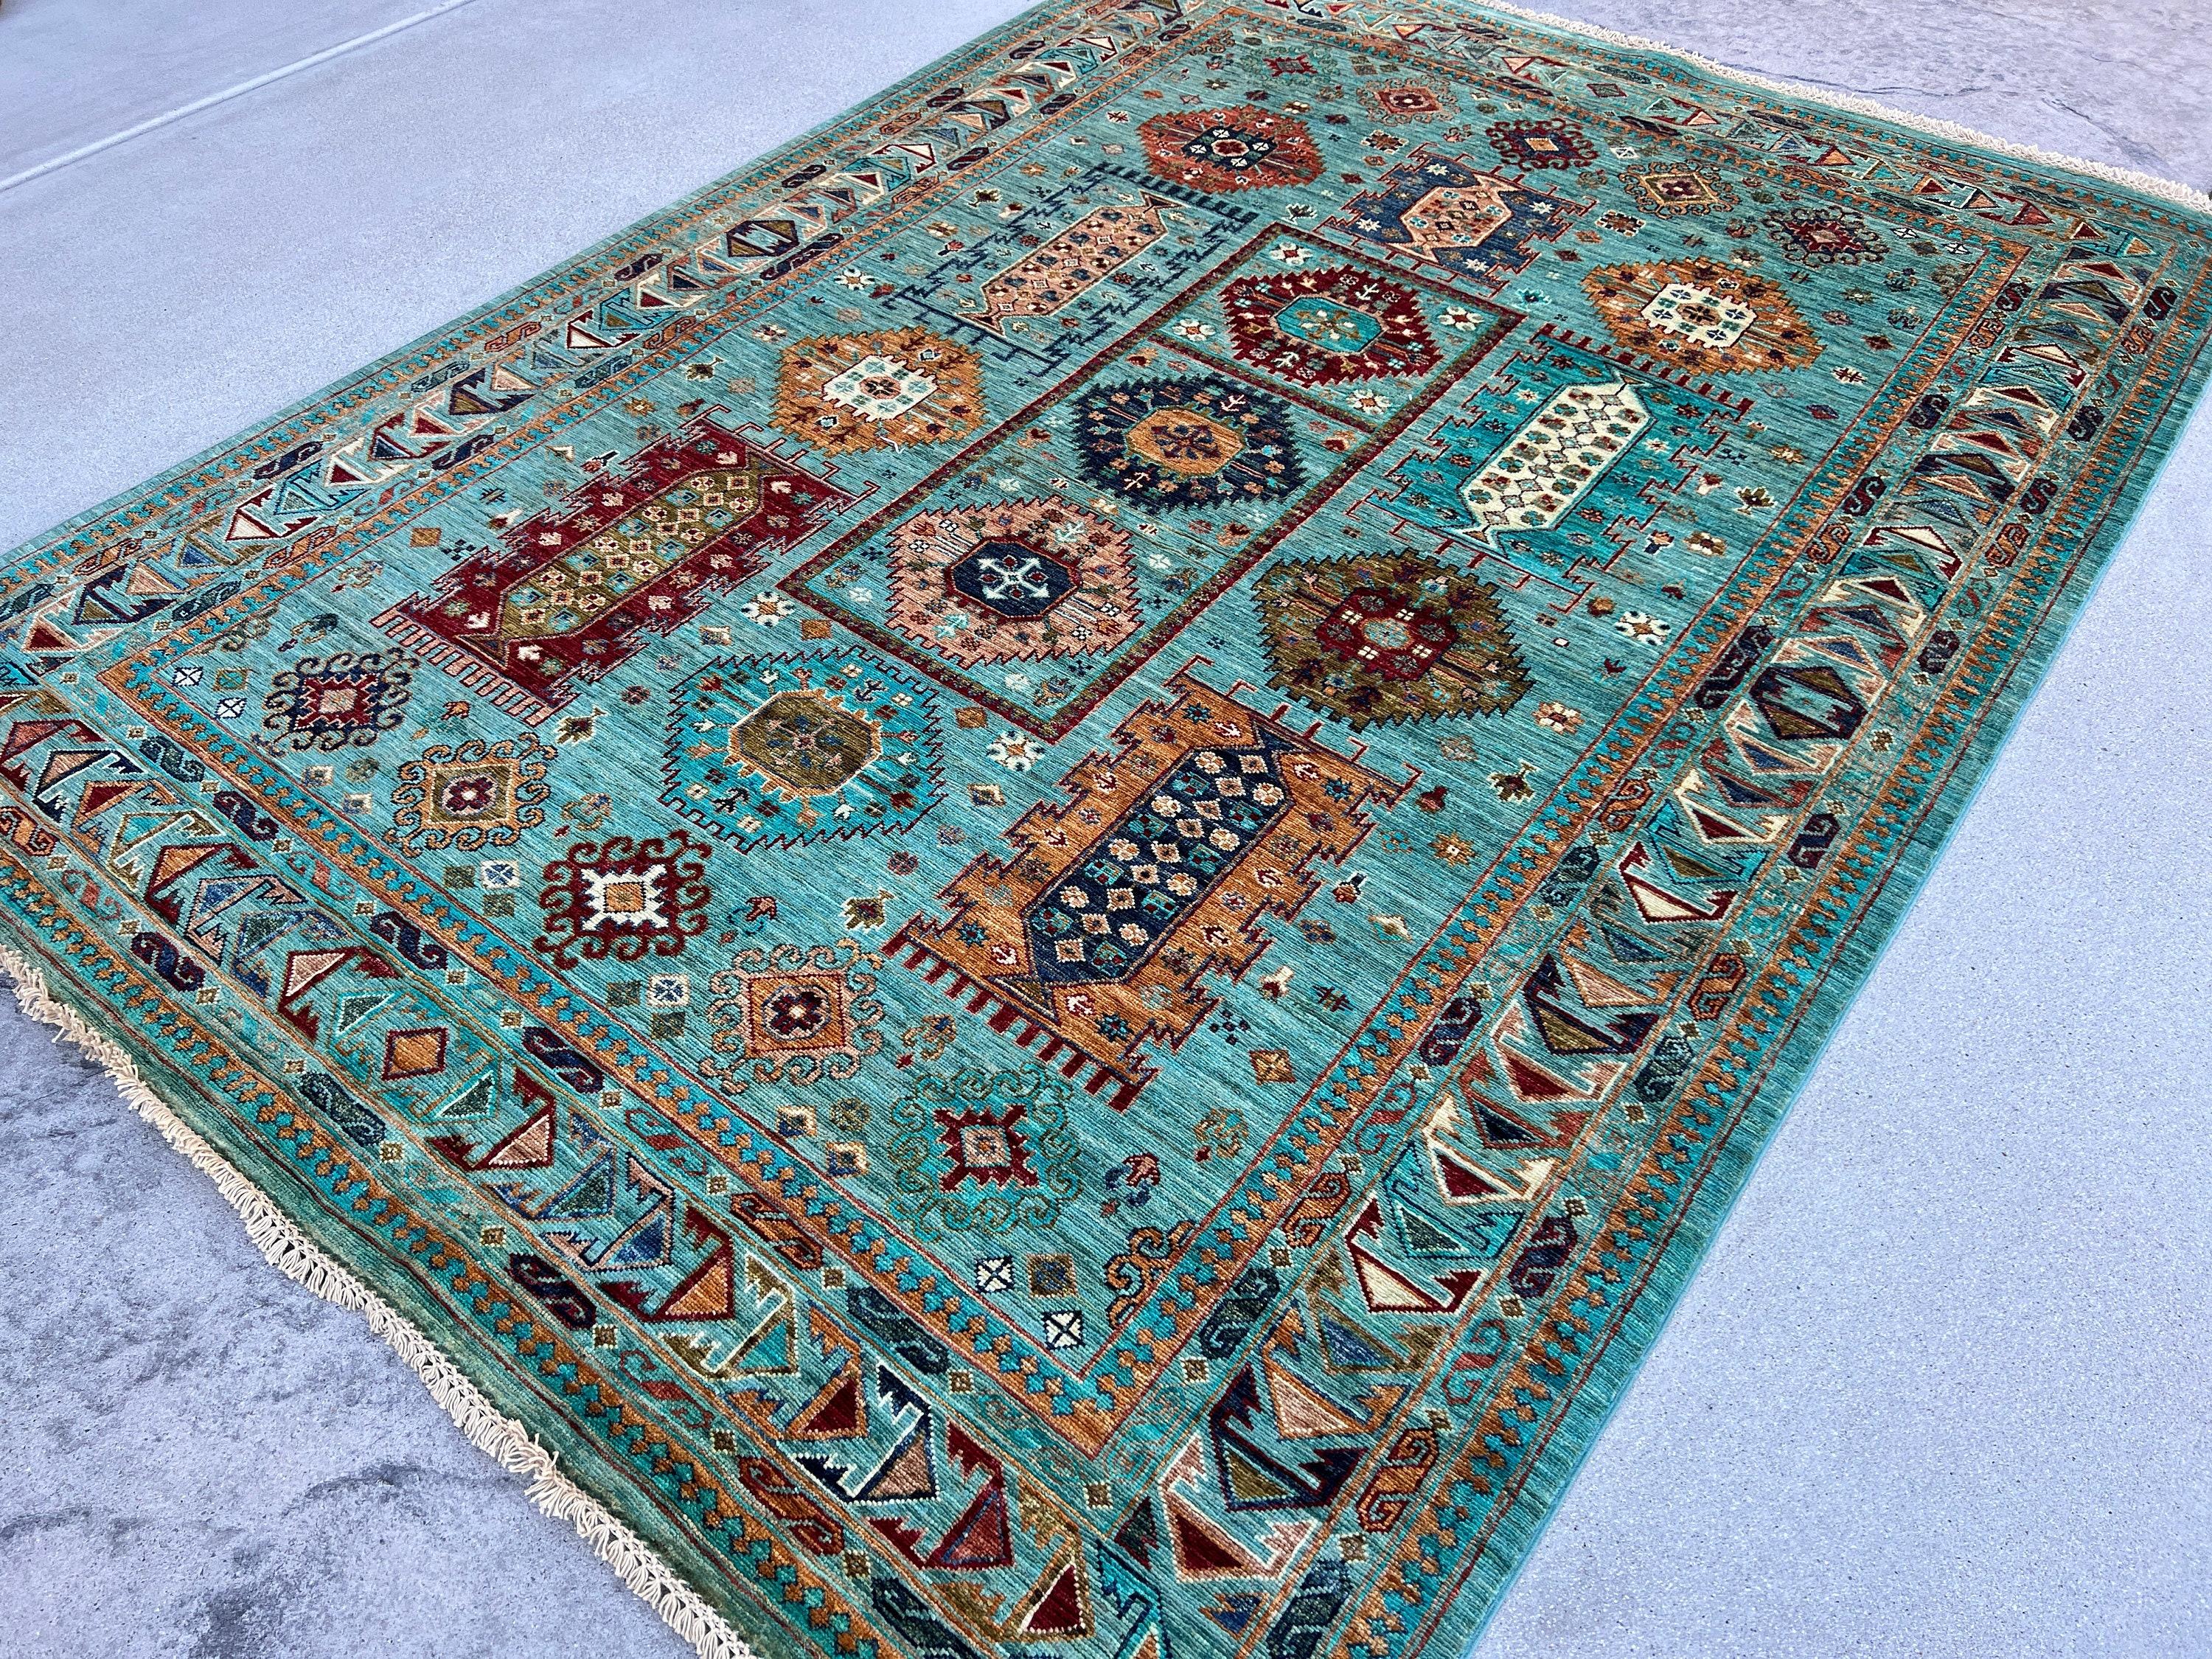 7x8 Hand-Knotted Afghan Rug Premium Hand-Spun Afghan Wool Fair Trade Turquoise  In New Condition For Sale In San Marcos, CA